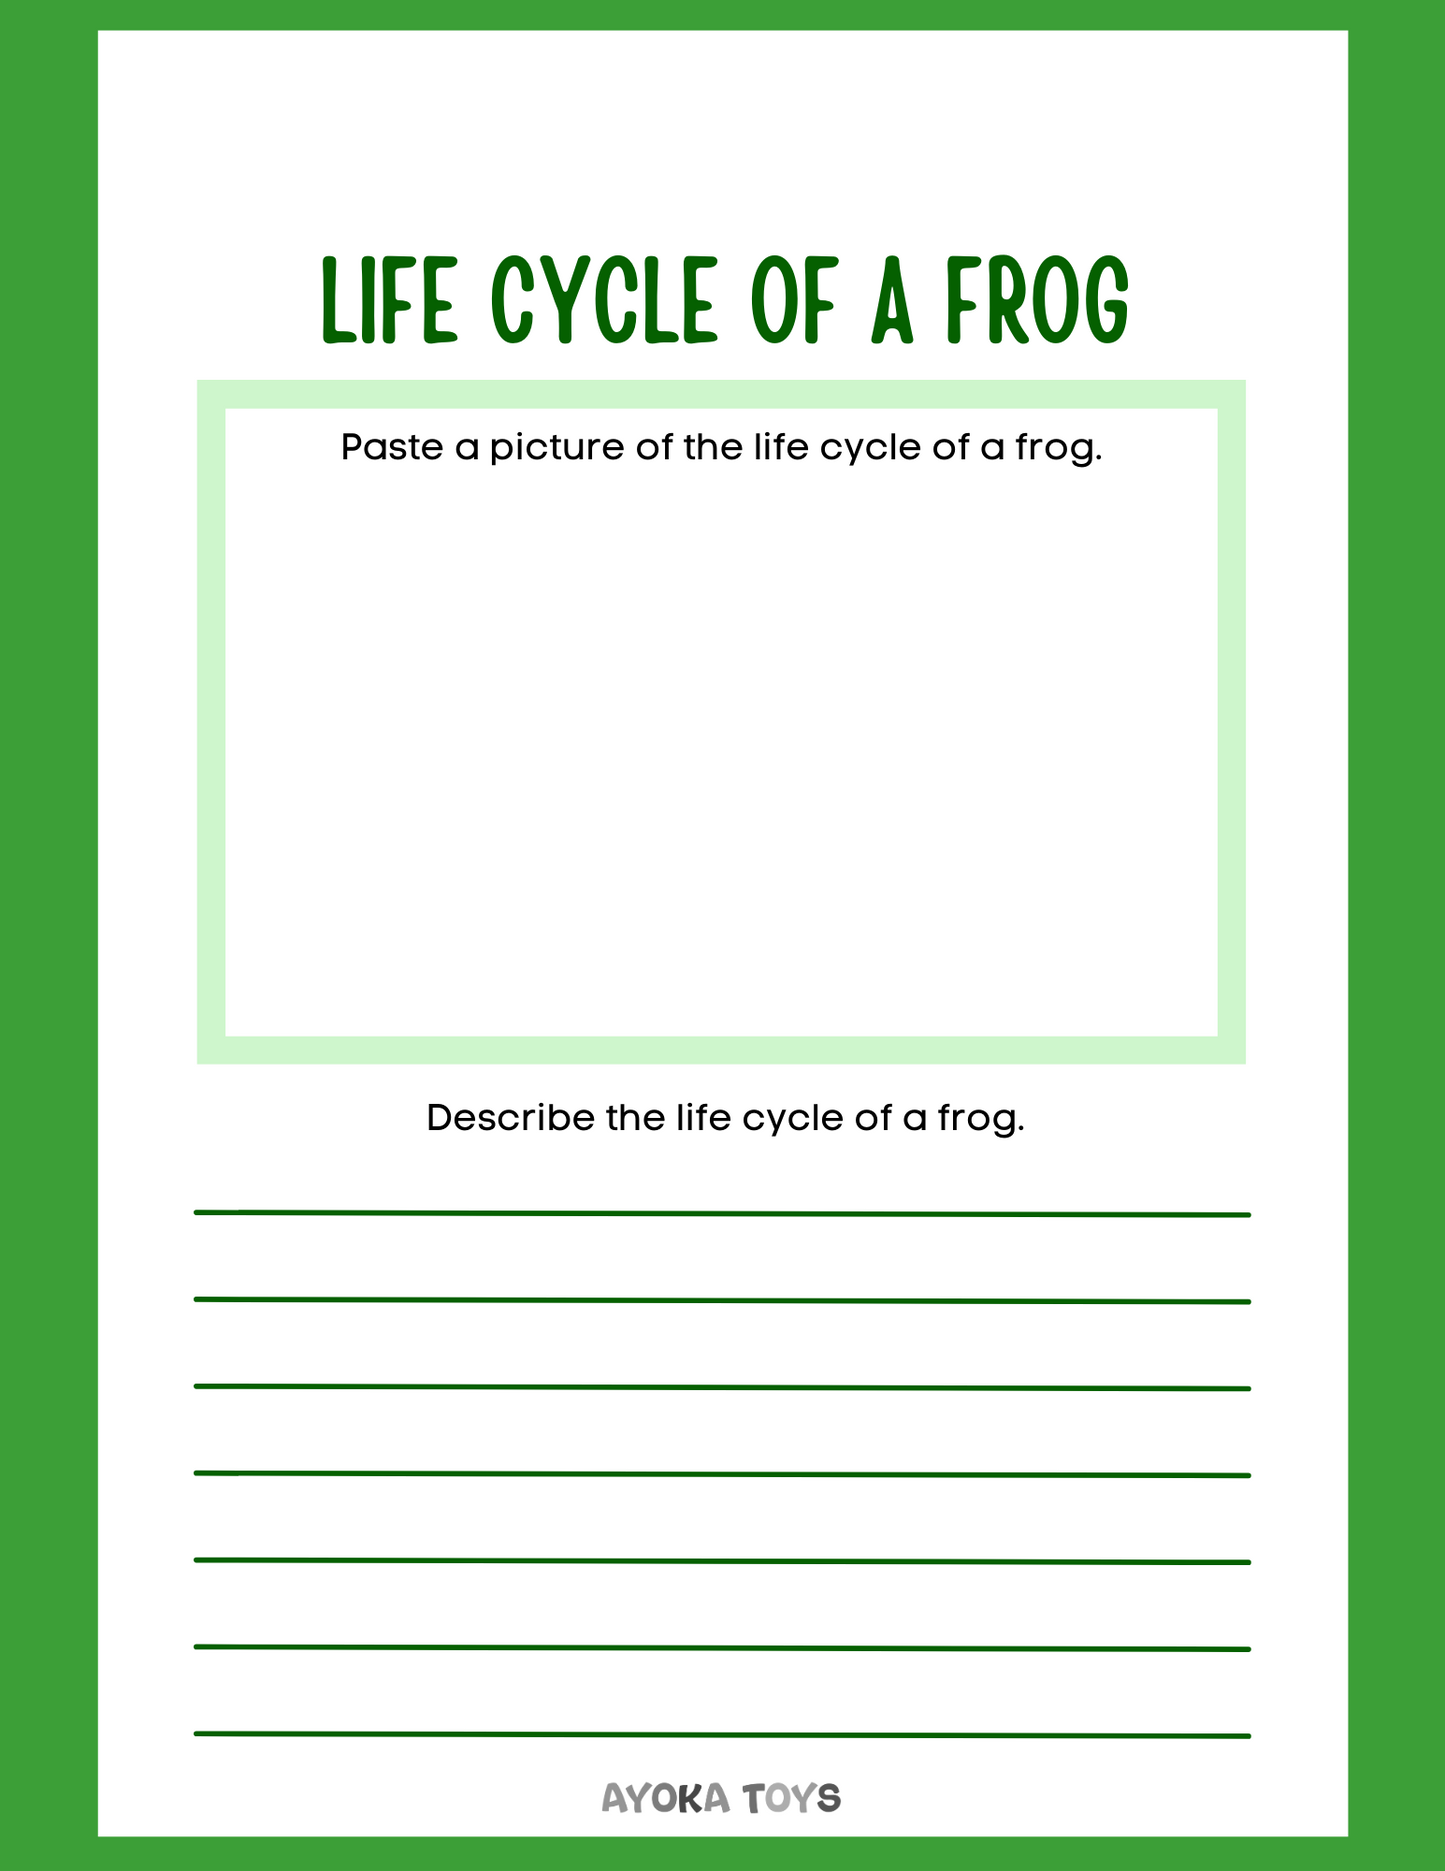 Animal Research - Frog